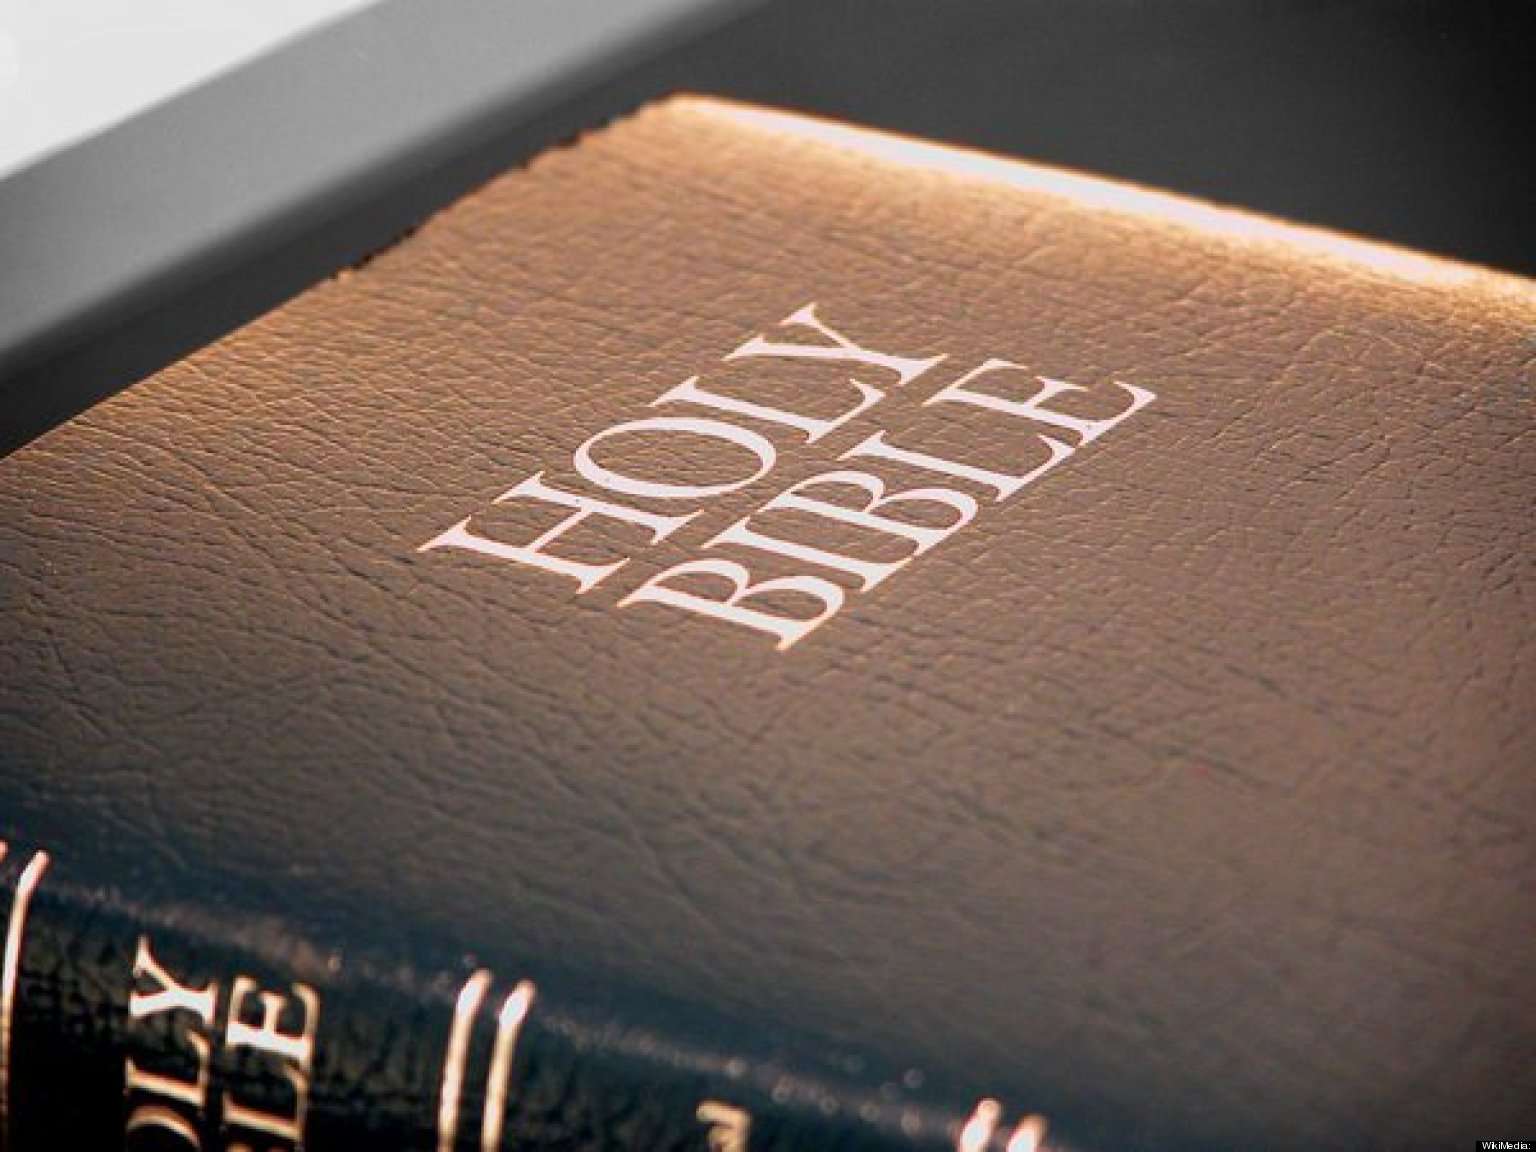 Abortion: What the Bible Says (and Doesn